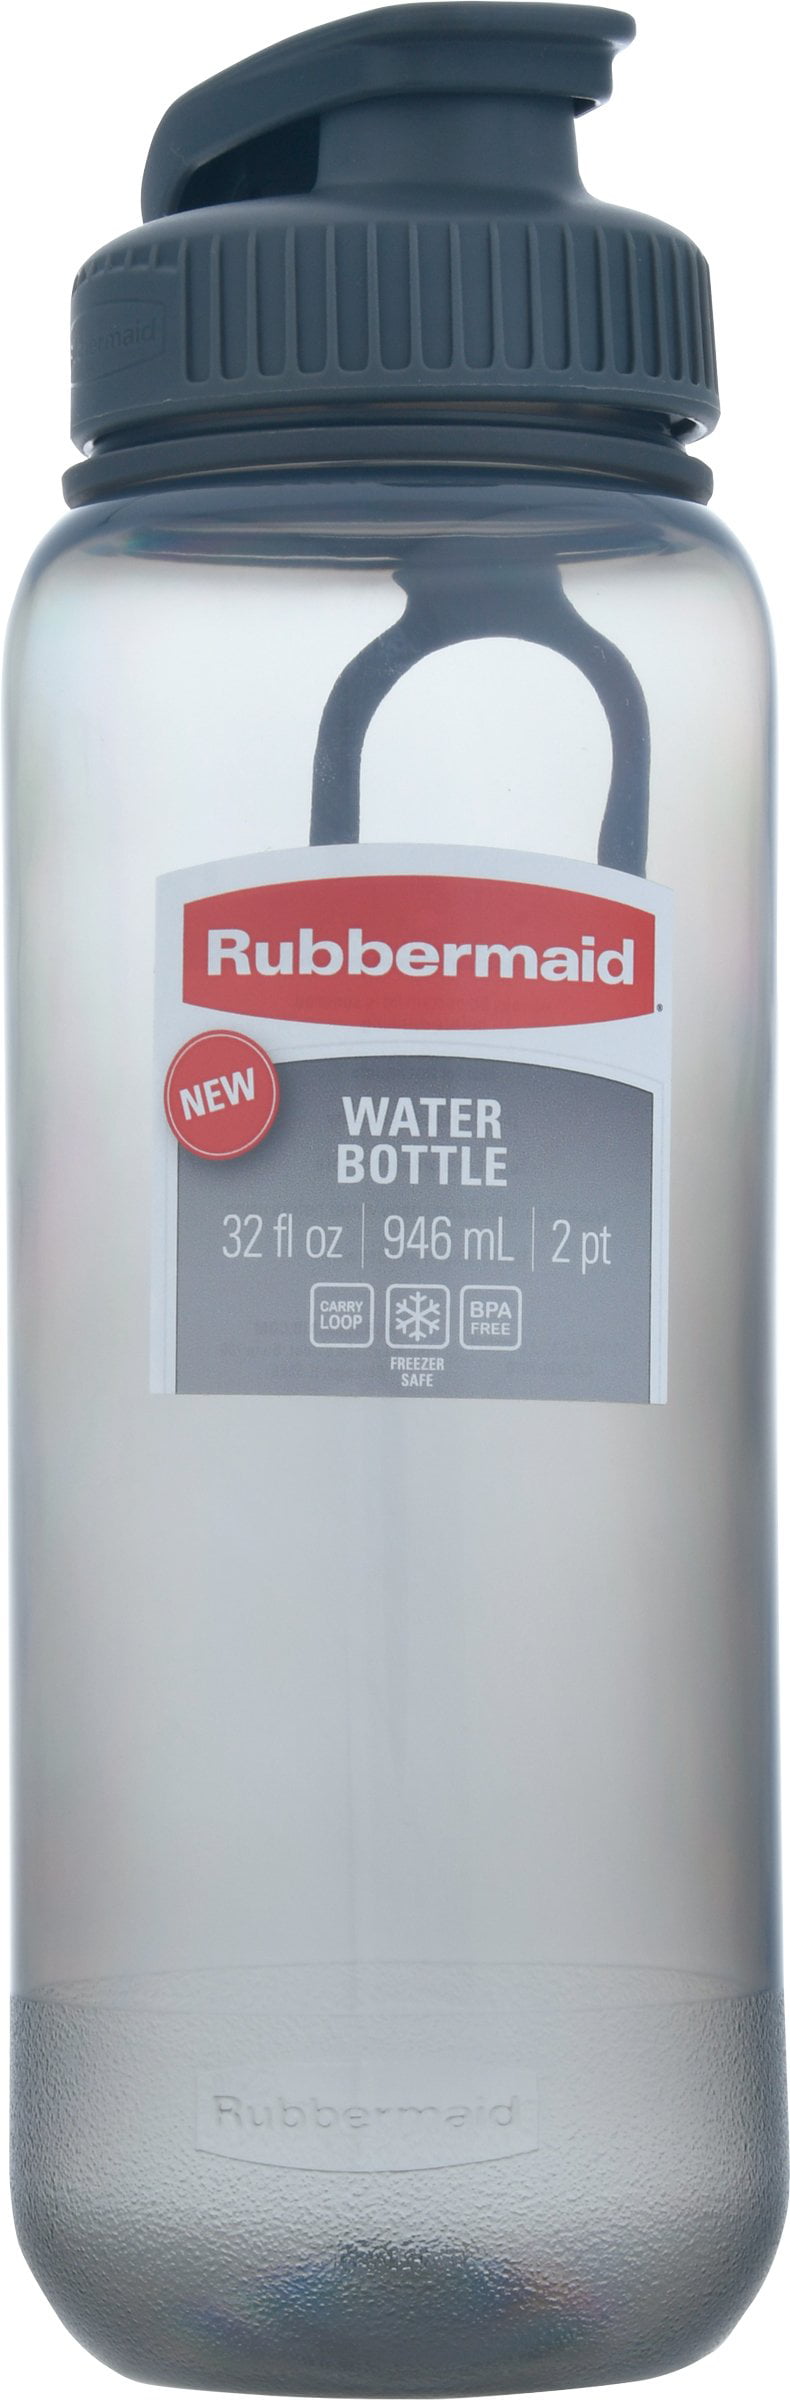 Rubbermaid Essentials 32oz Blue Plastic Water Bottle with Chug